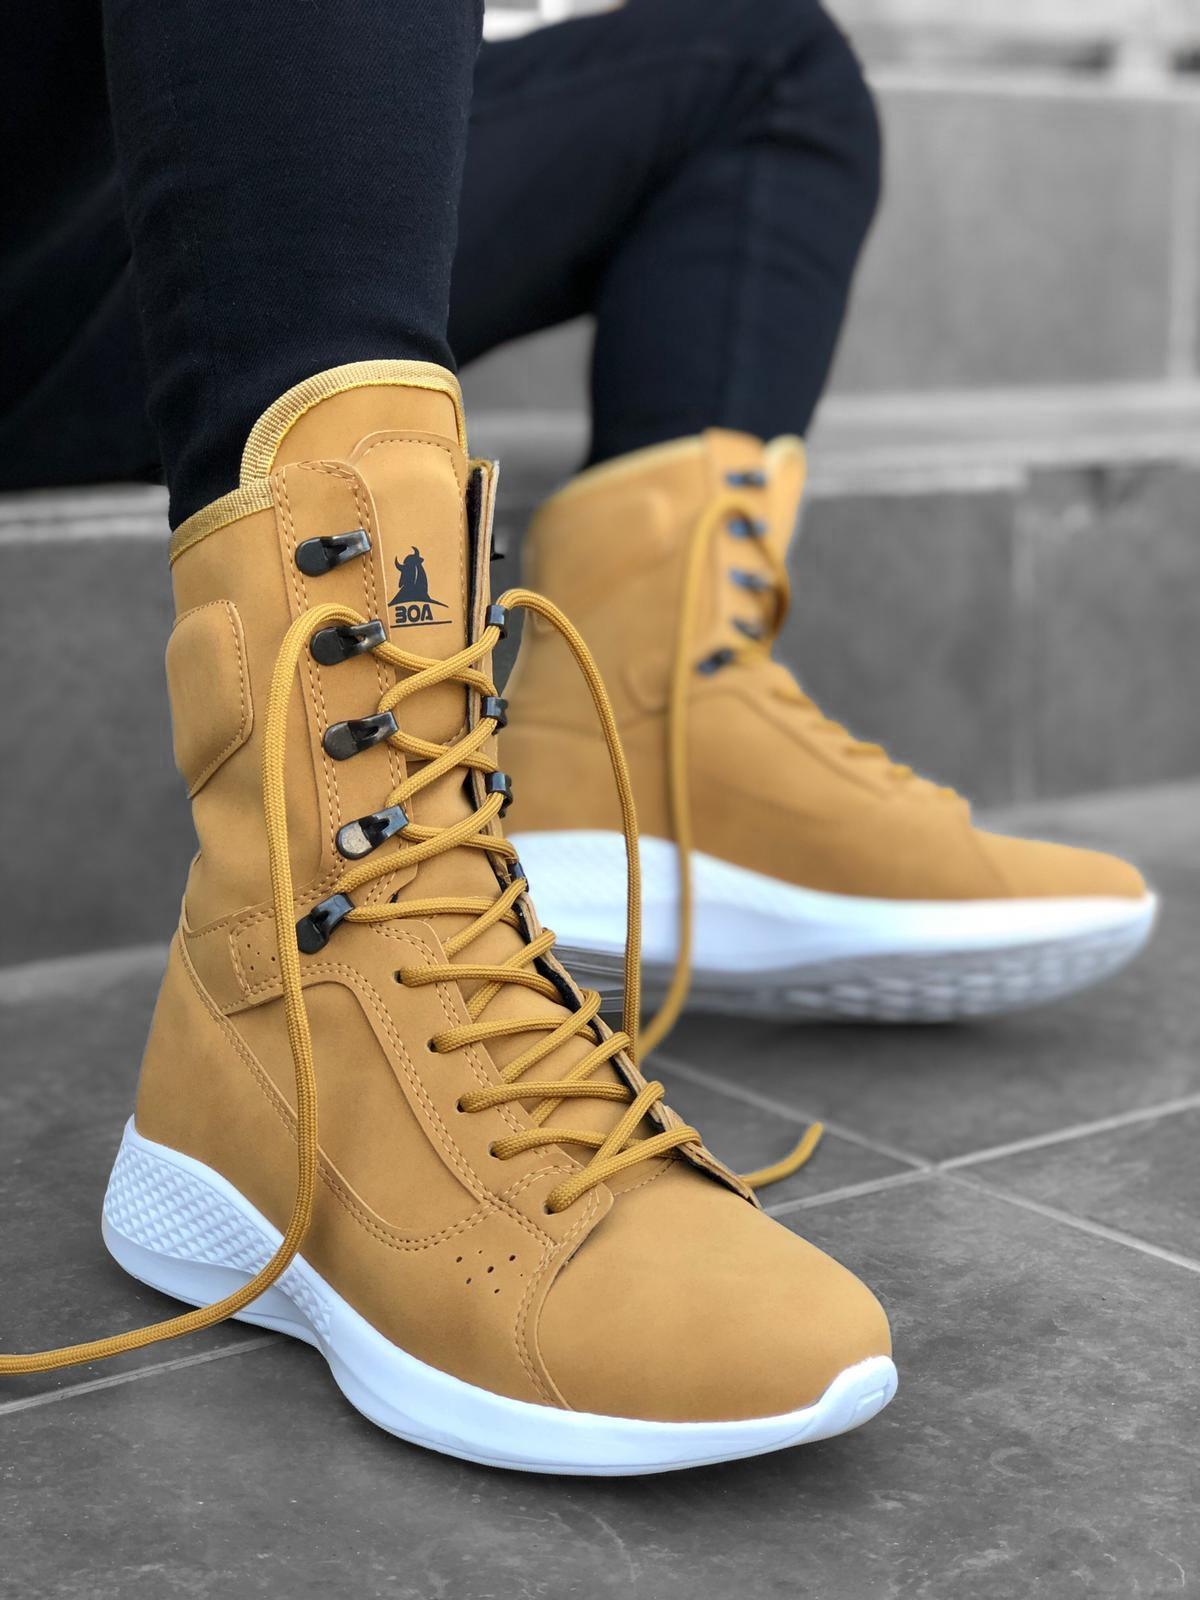 BA0600 Lace-up Camel Yellow Boxer Unisex Sport Mail Boot - STREET MODE ™